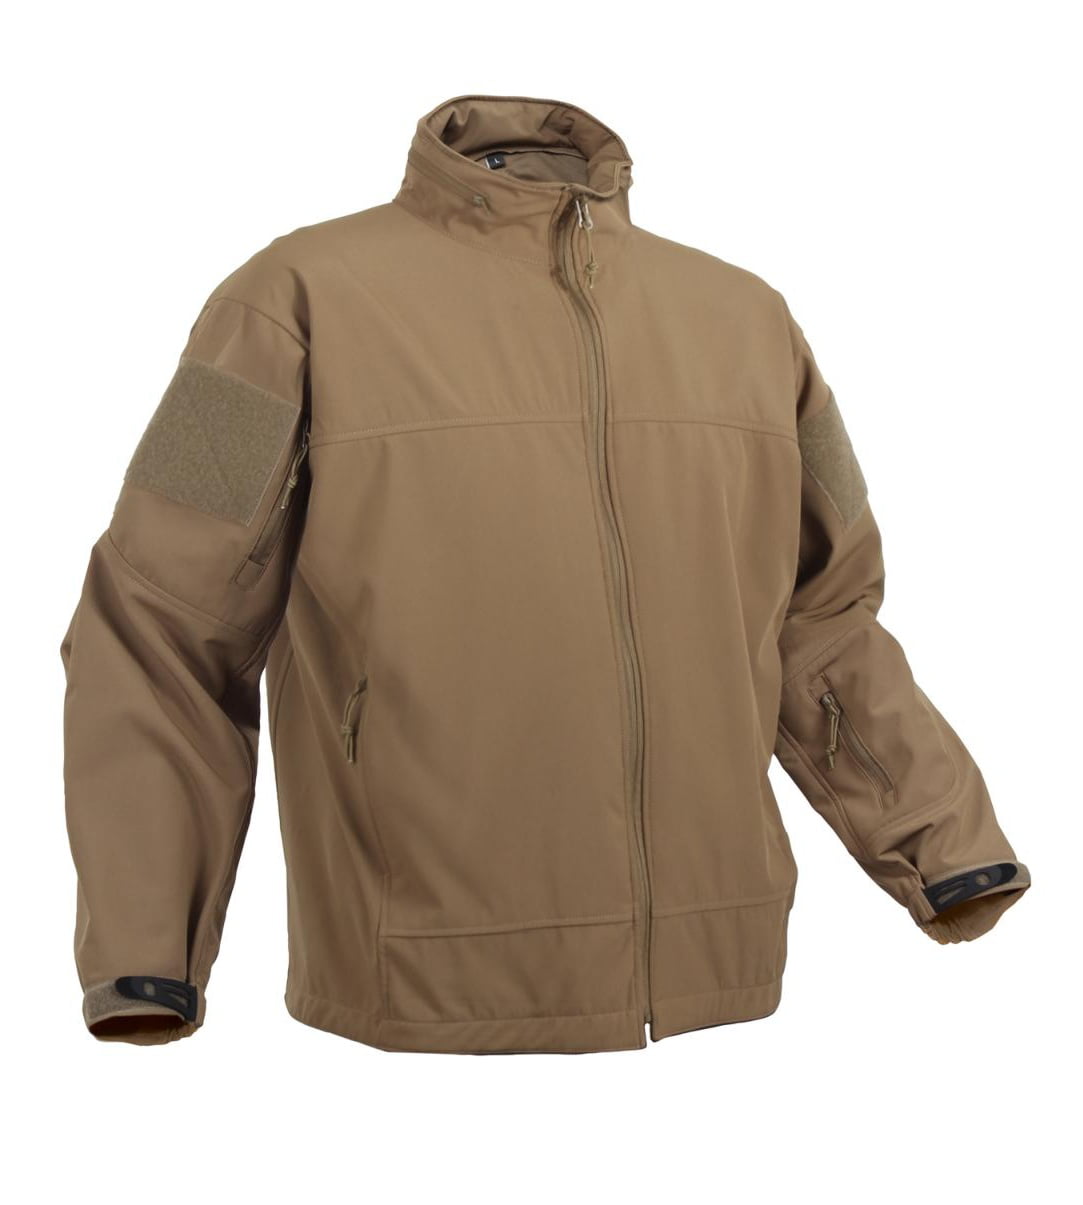 Rothco - Covert Ops Light Weight Coyote Tan Soft Shell Jacket 2X-Large ...